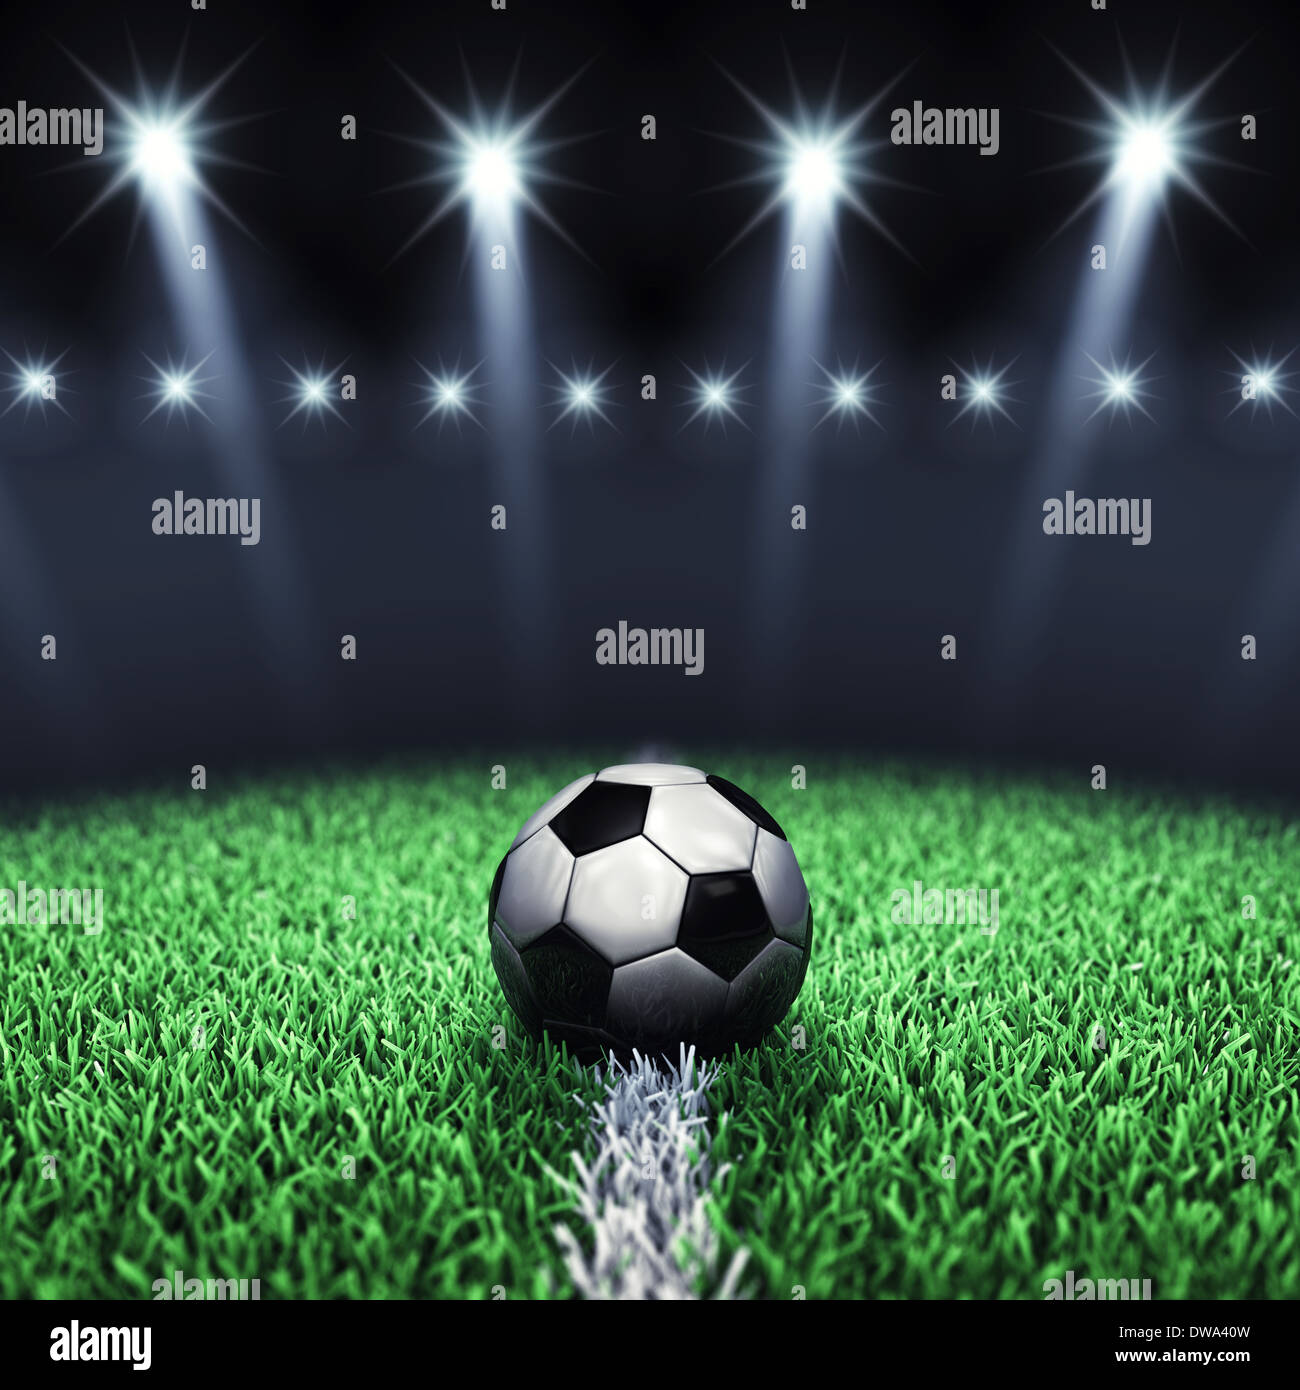 Soccer arena and ball with floodlights Stock Photo